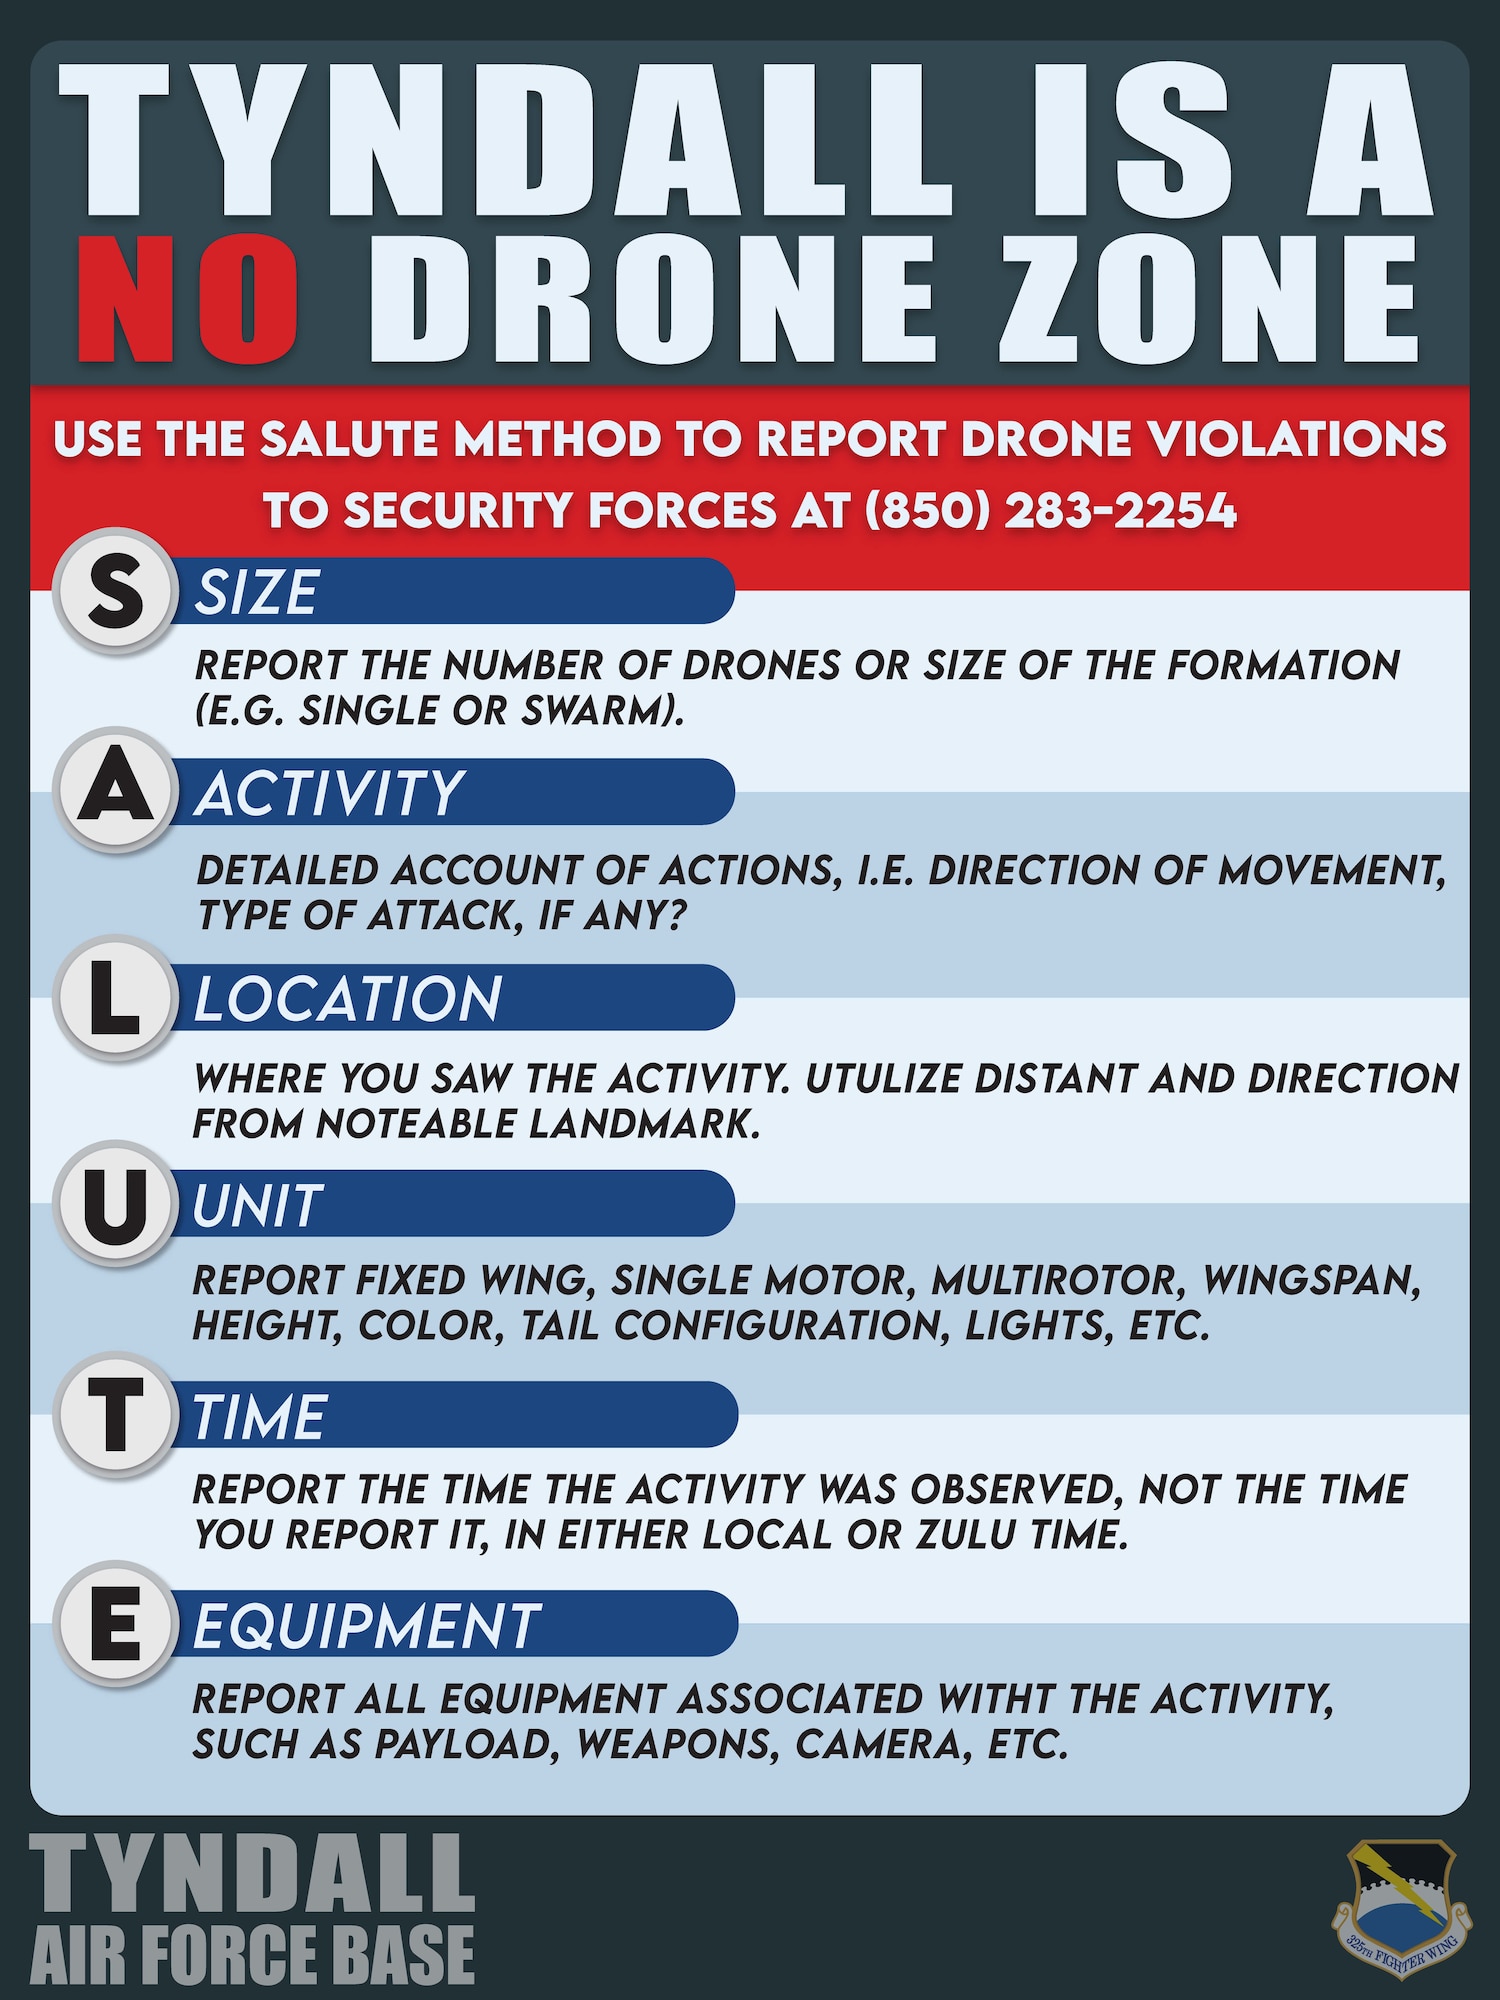 A graphic about how Tyndall is a no drone zone